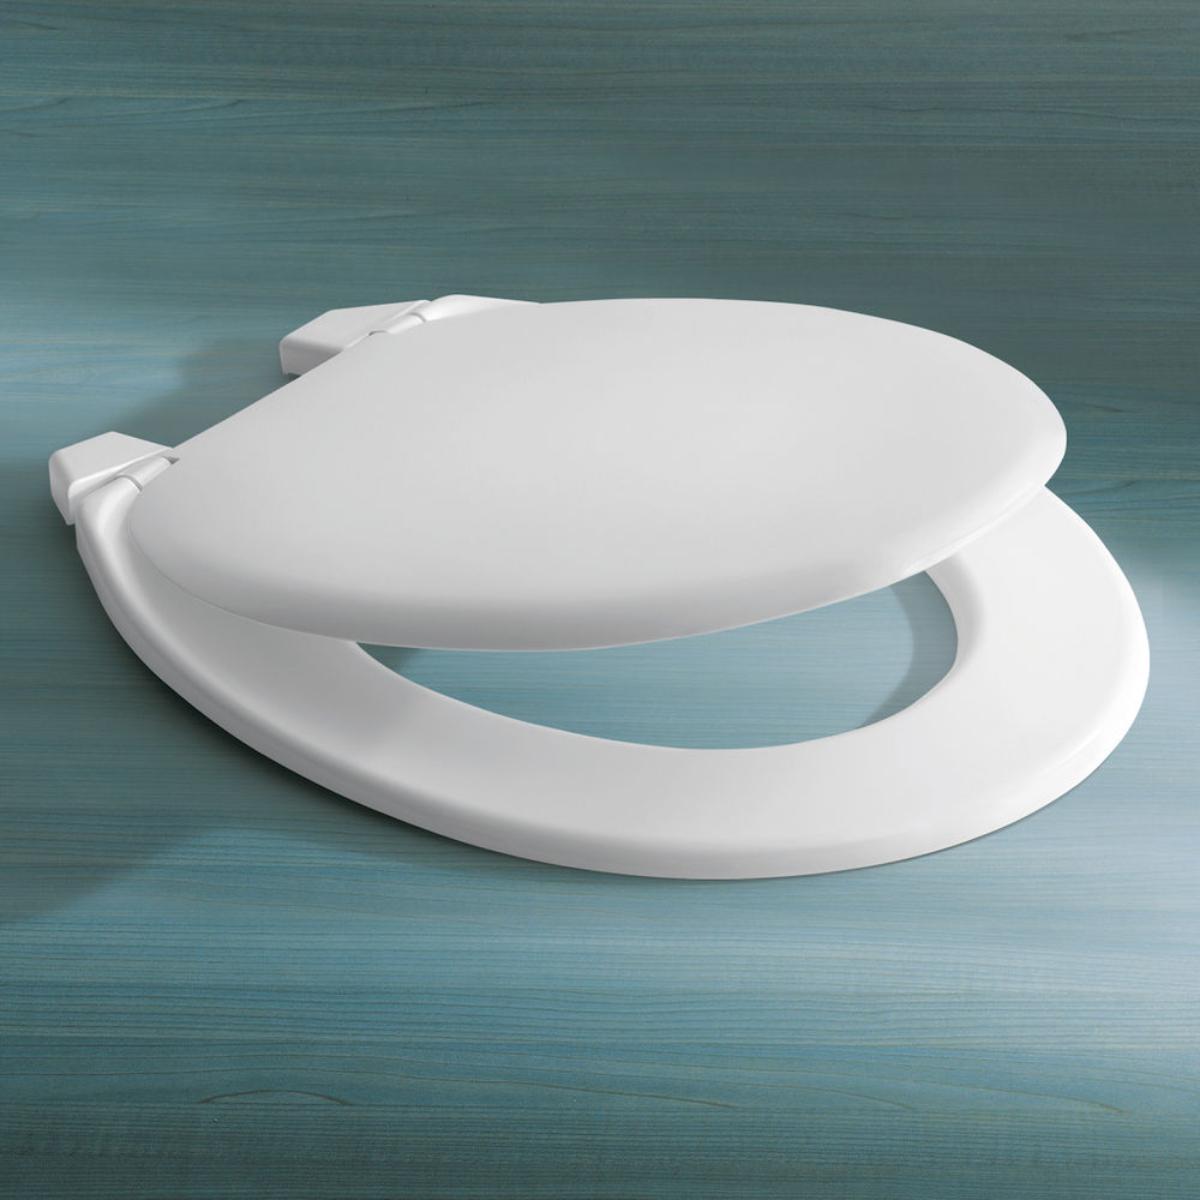 M3 STANDARD WH TOILET SEAT